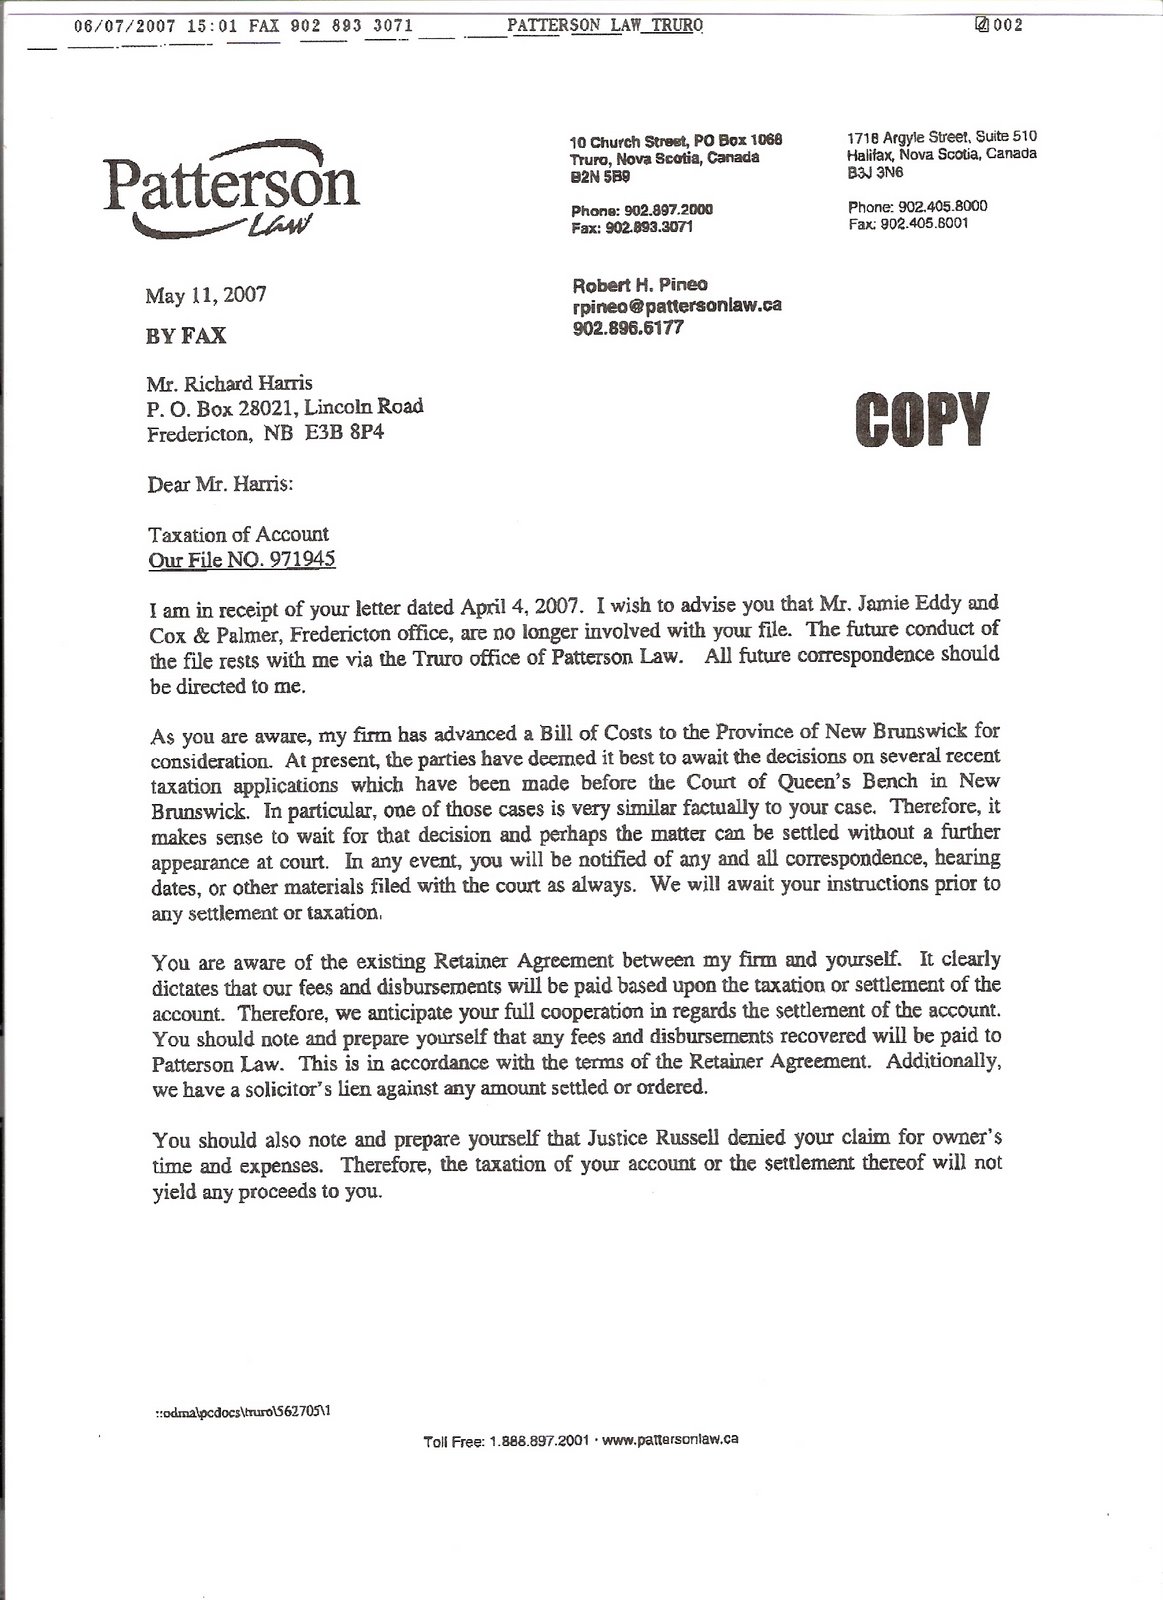 [07+letter+from+Patterson+law.jpg]